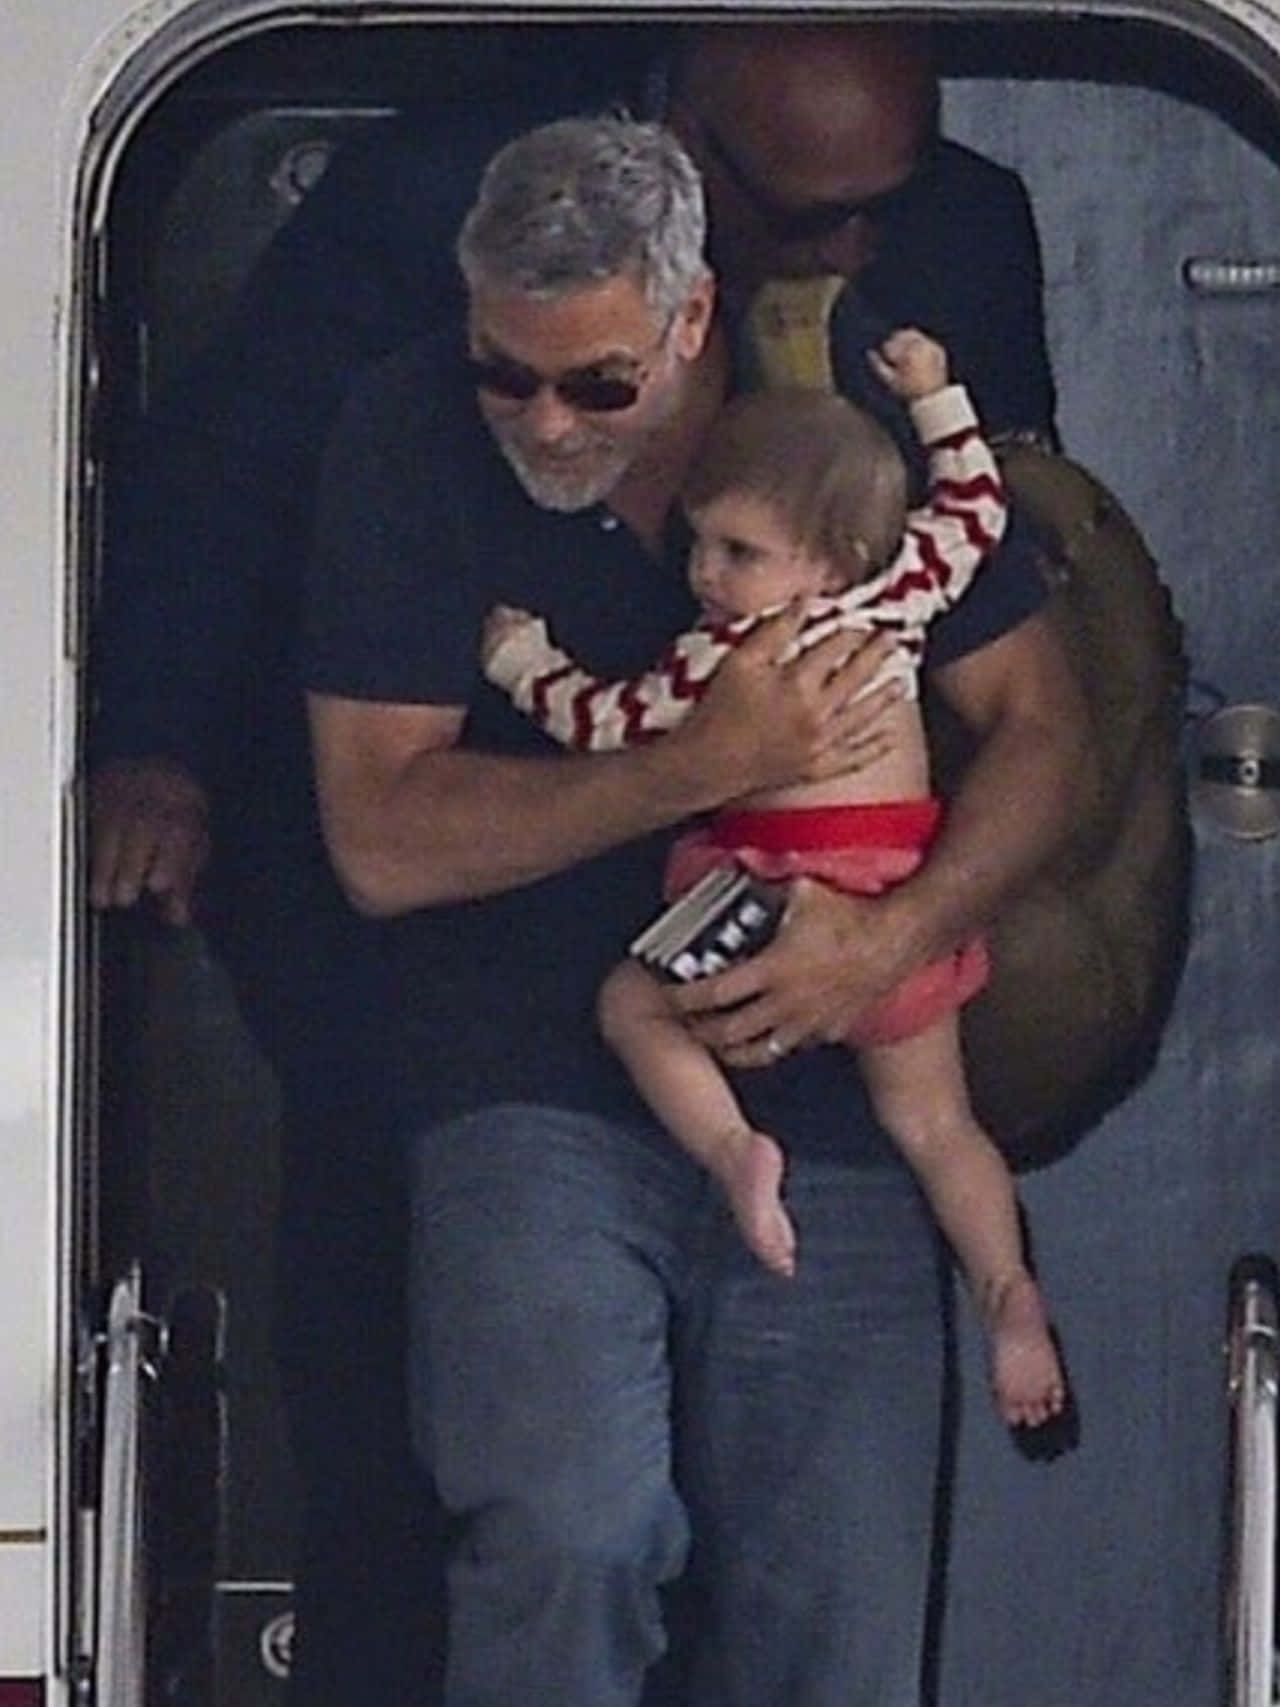 Alexander and Ella Clooney - the Future of Hollywood